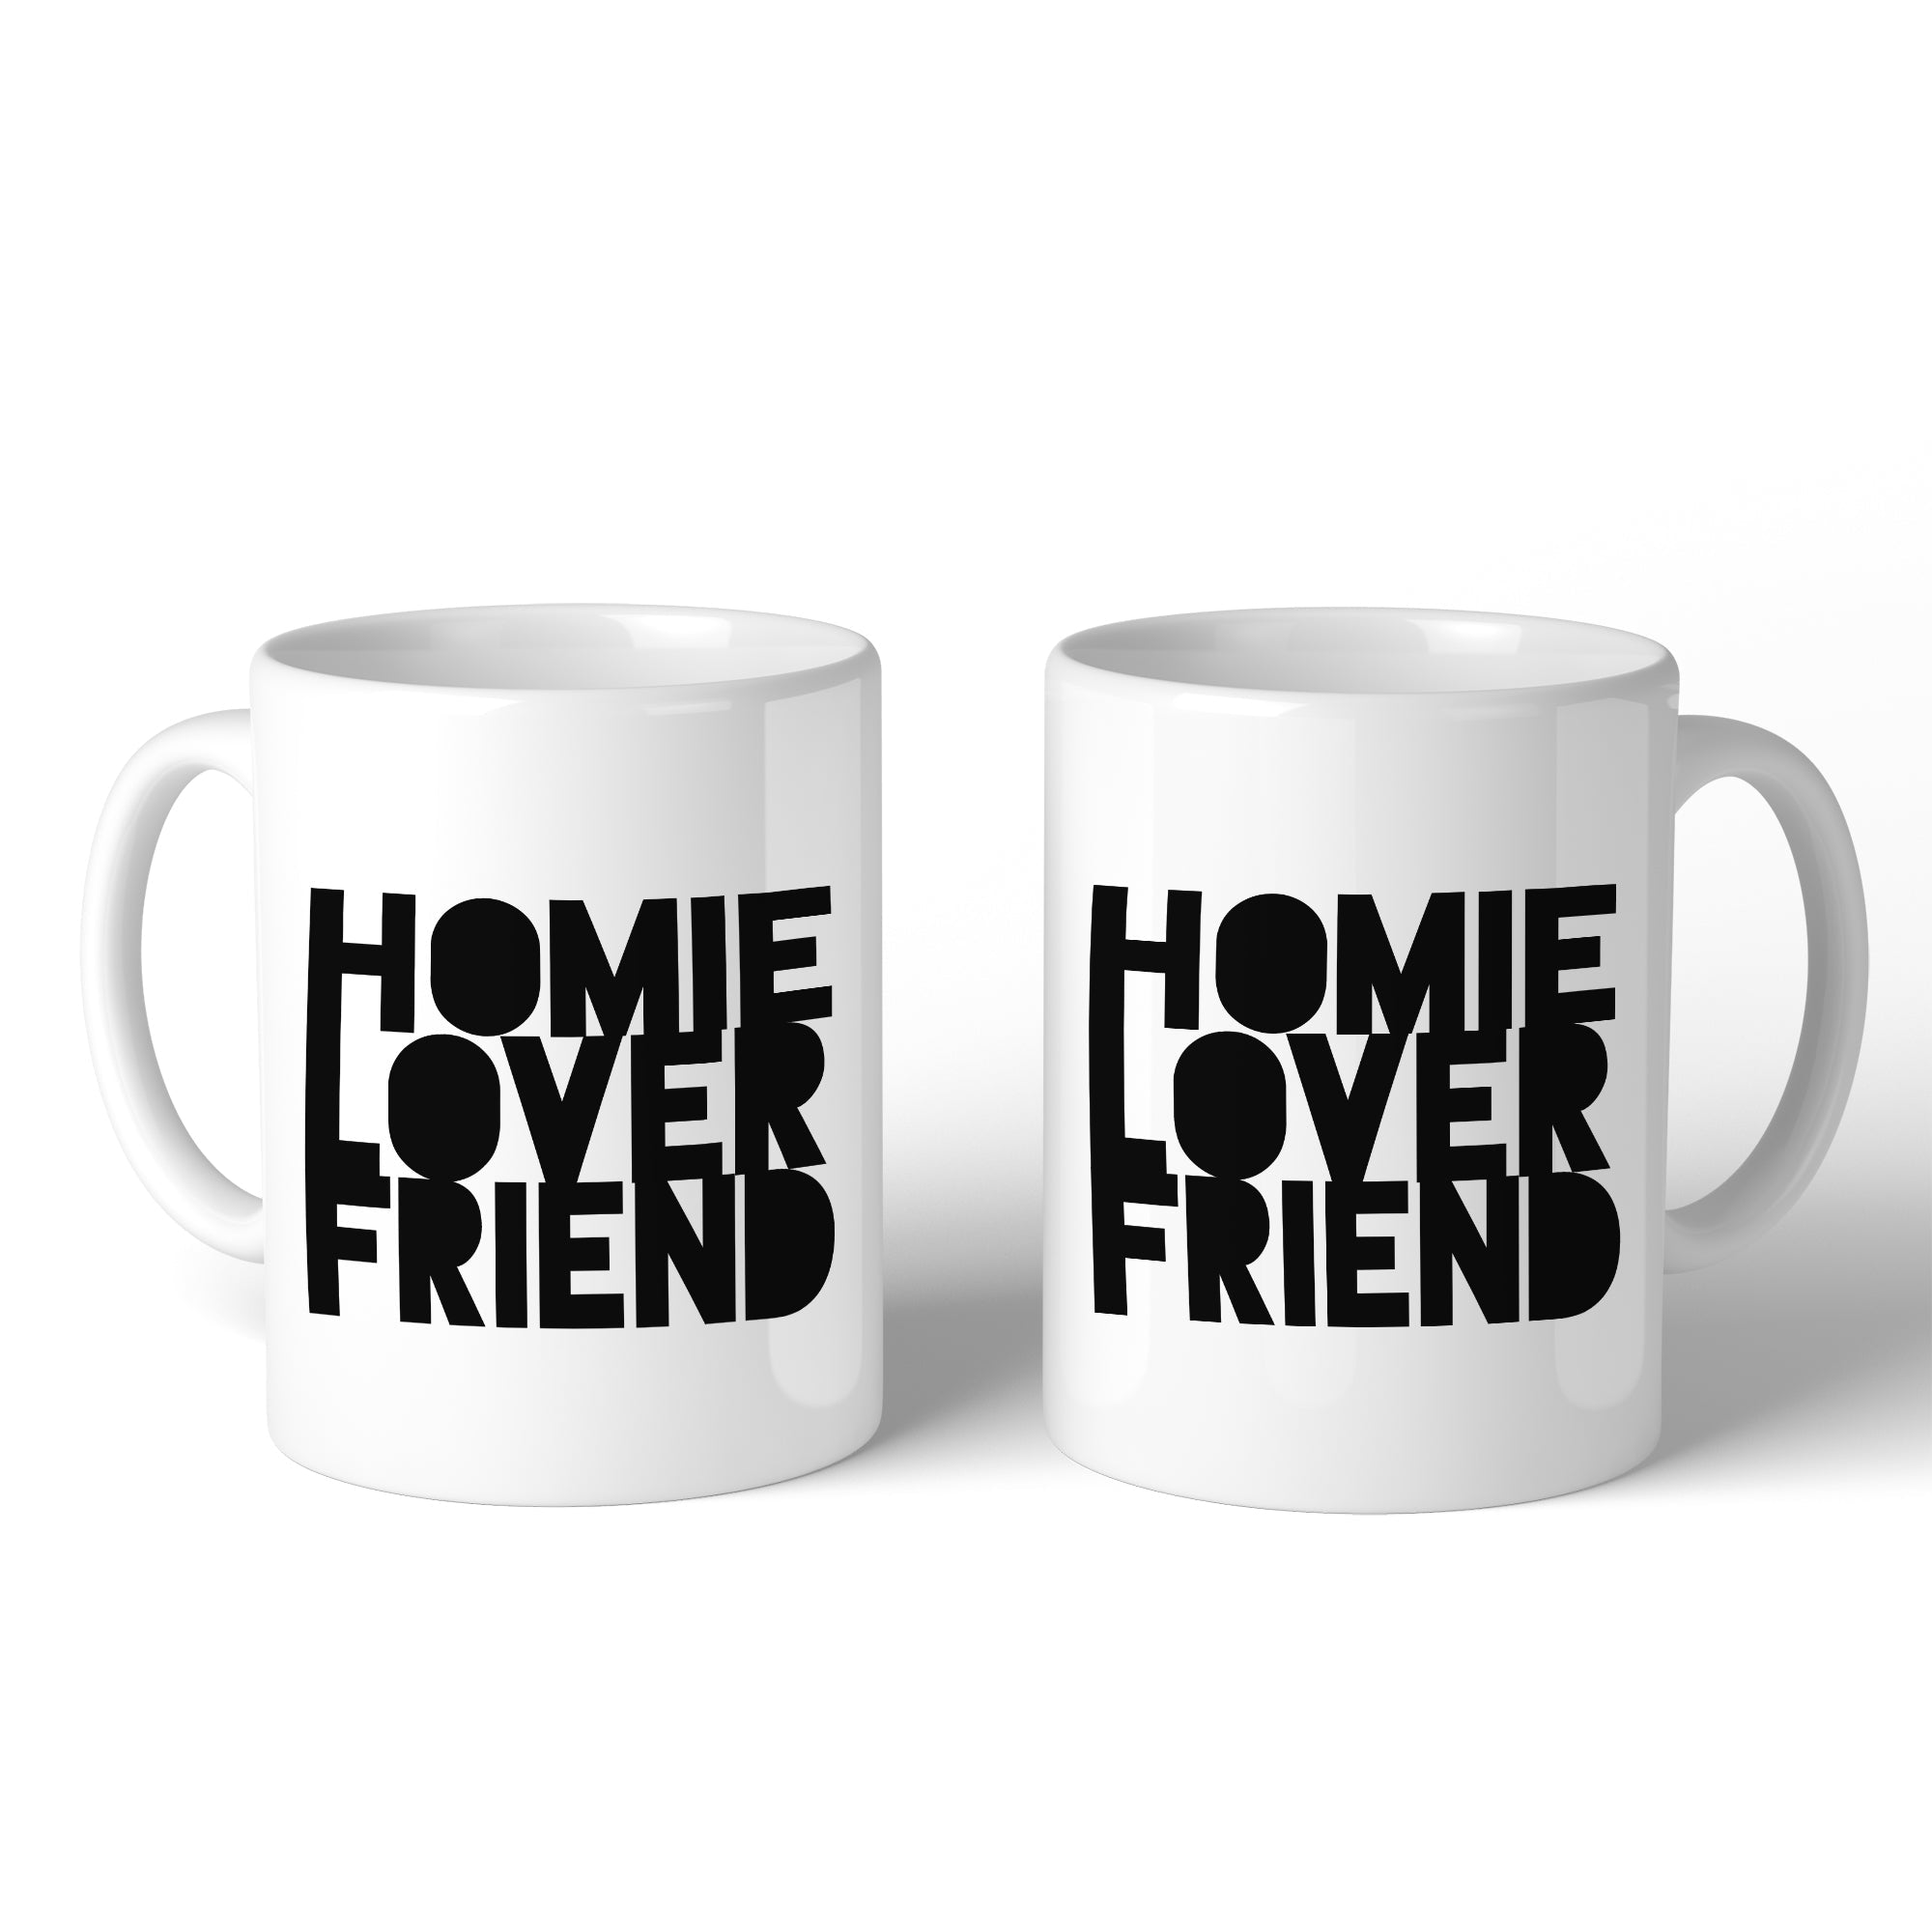 Homie Lover Friend Unique Graphic Coffee Mugs Gift for Newlyweds